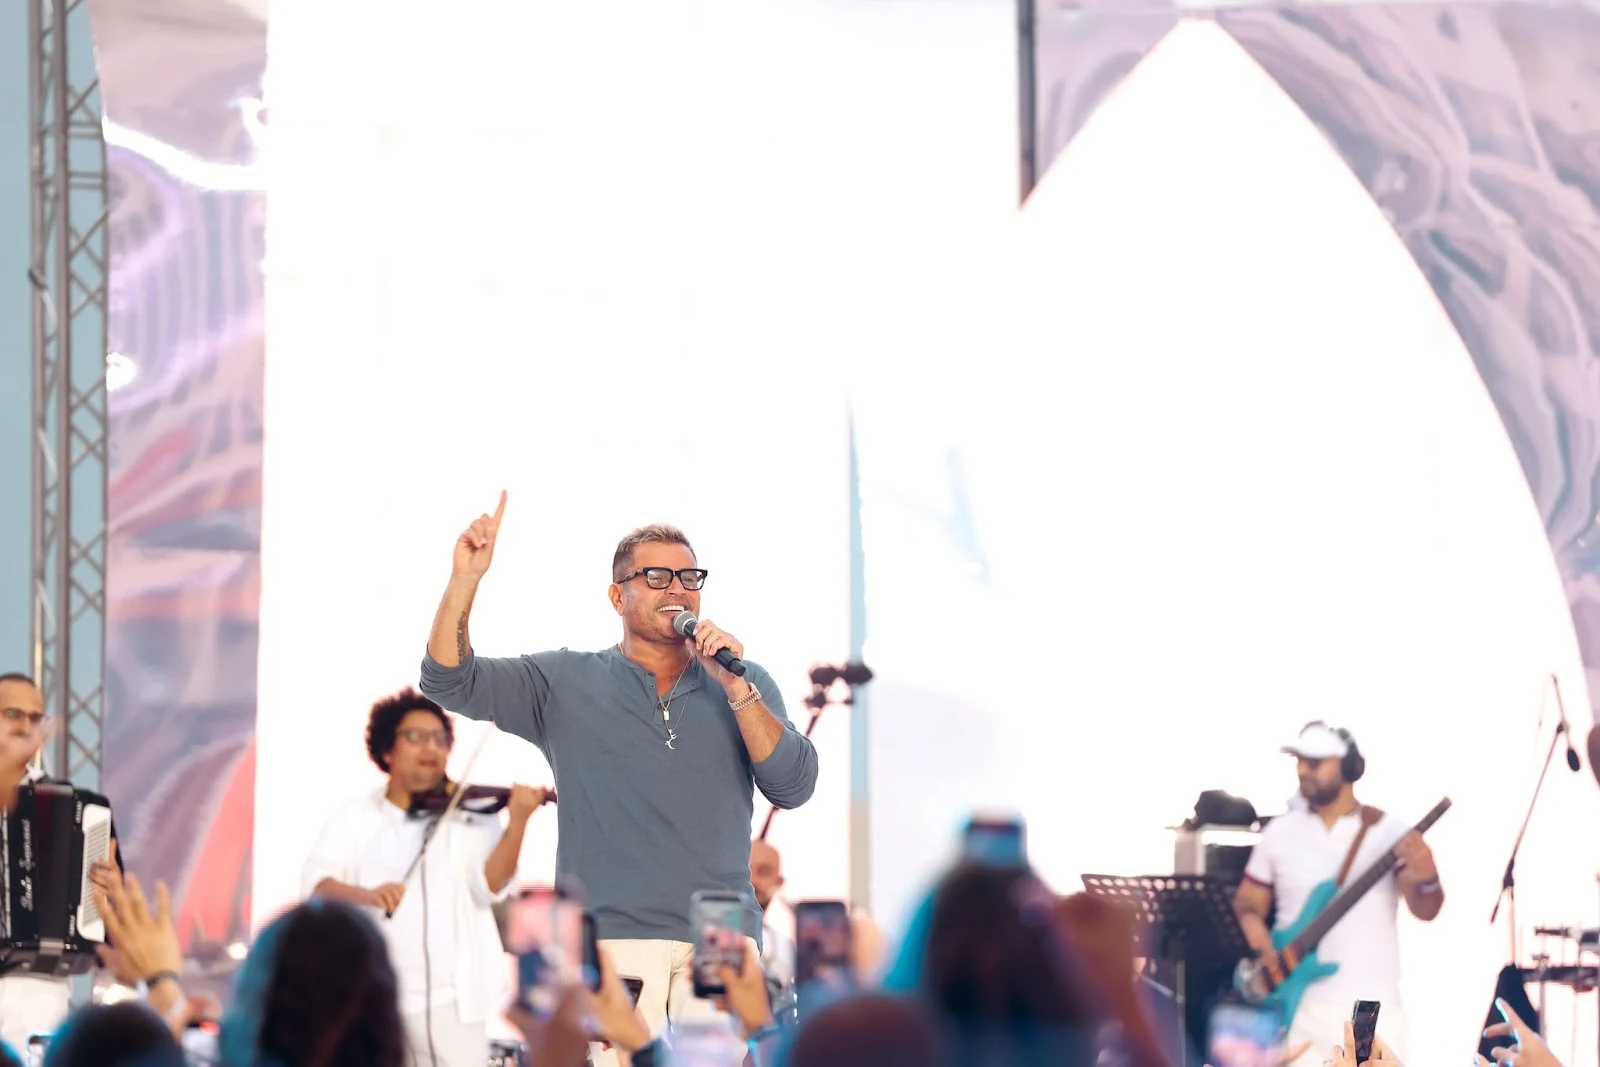 Amr Diab lit up the stage last night at Xanadu Makadi Bay #AmrDiab lit up the stage last night at Xanadu Makadi Bay🔥! Check out these snippets from the show and relive the magic.  Photography: Mahmoud Loutfy